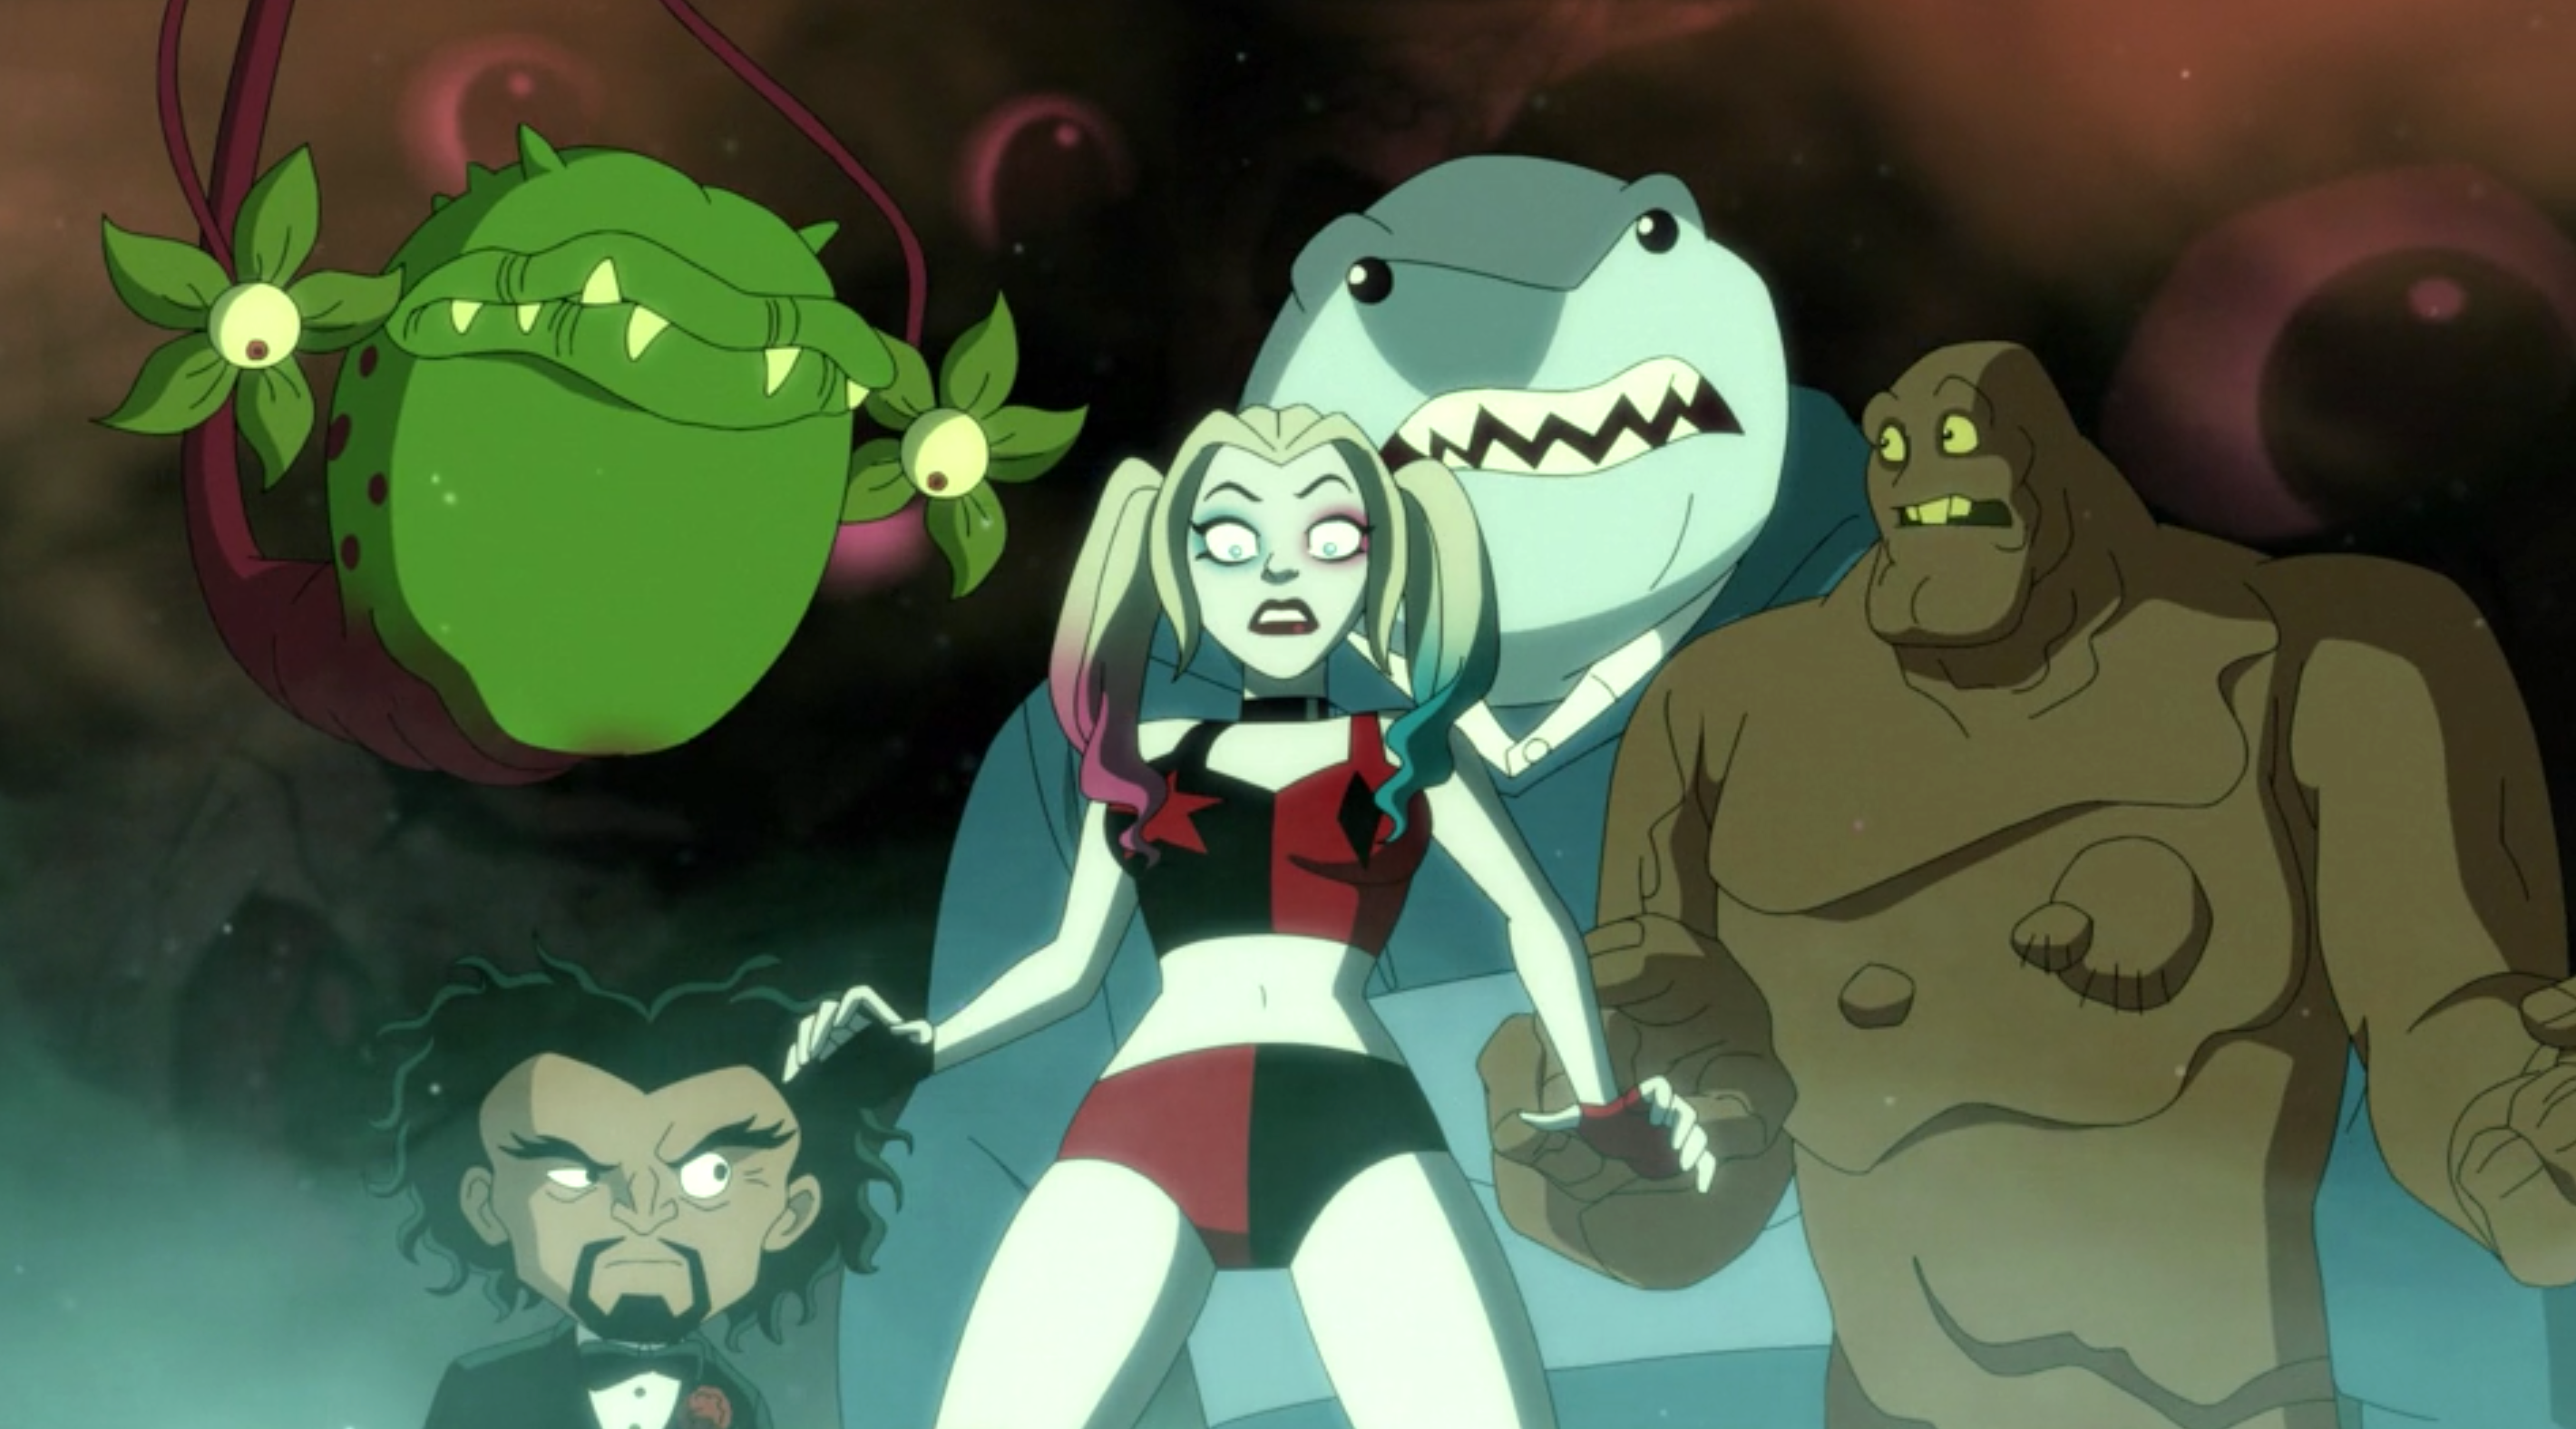 When it comes to villain team-ups, Harley Quinn rivals The Suicide Squad